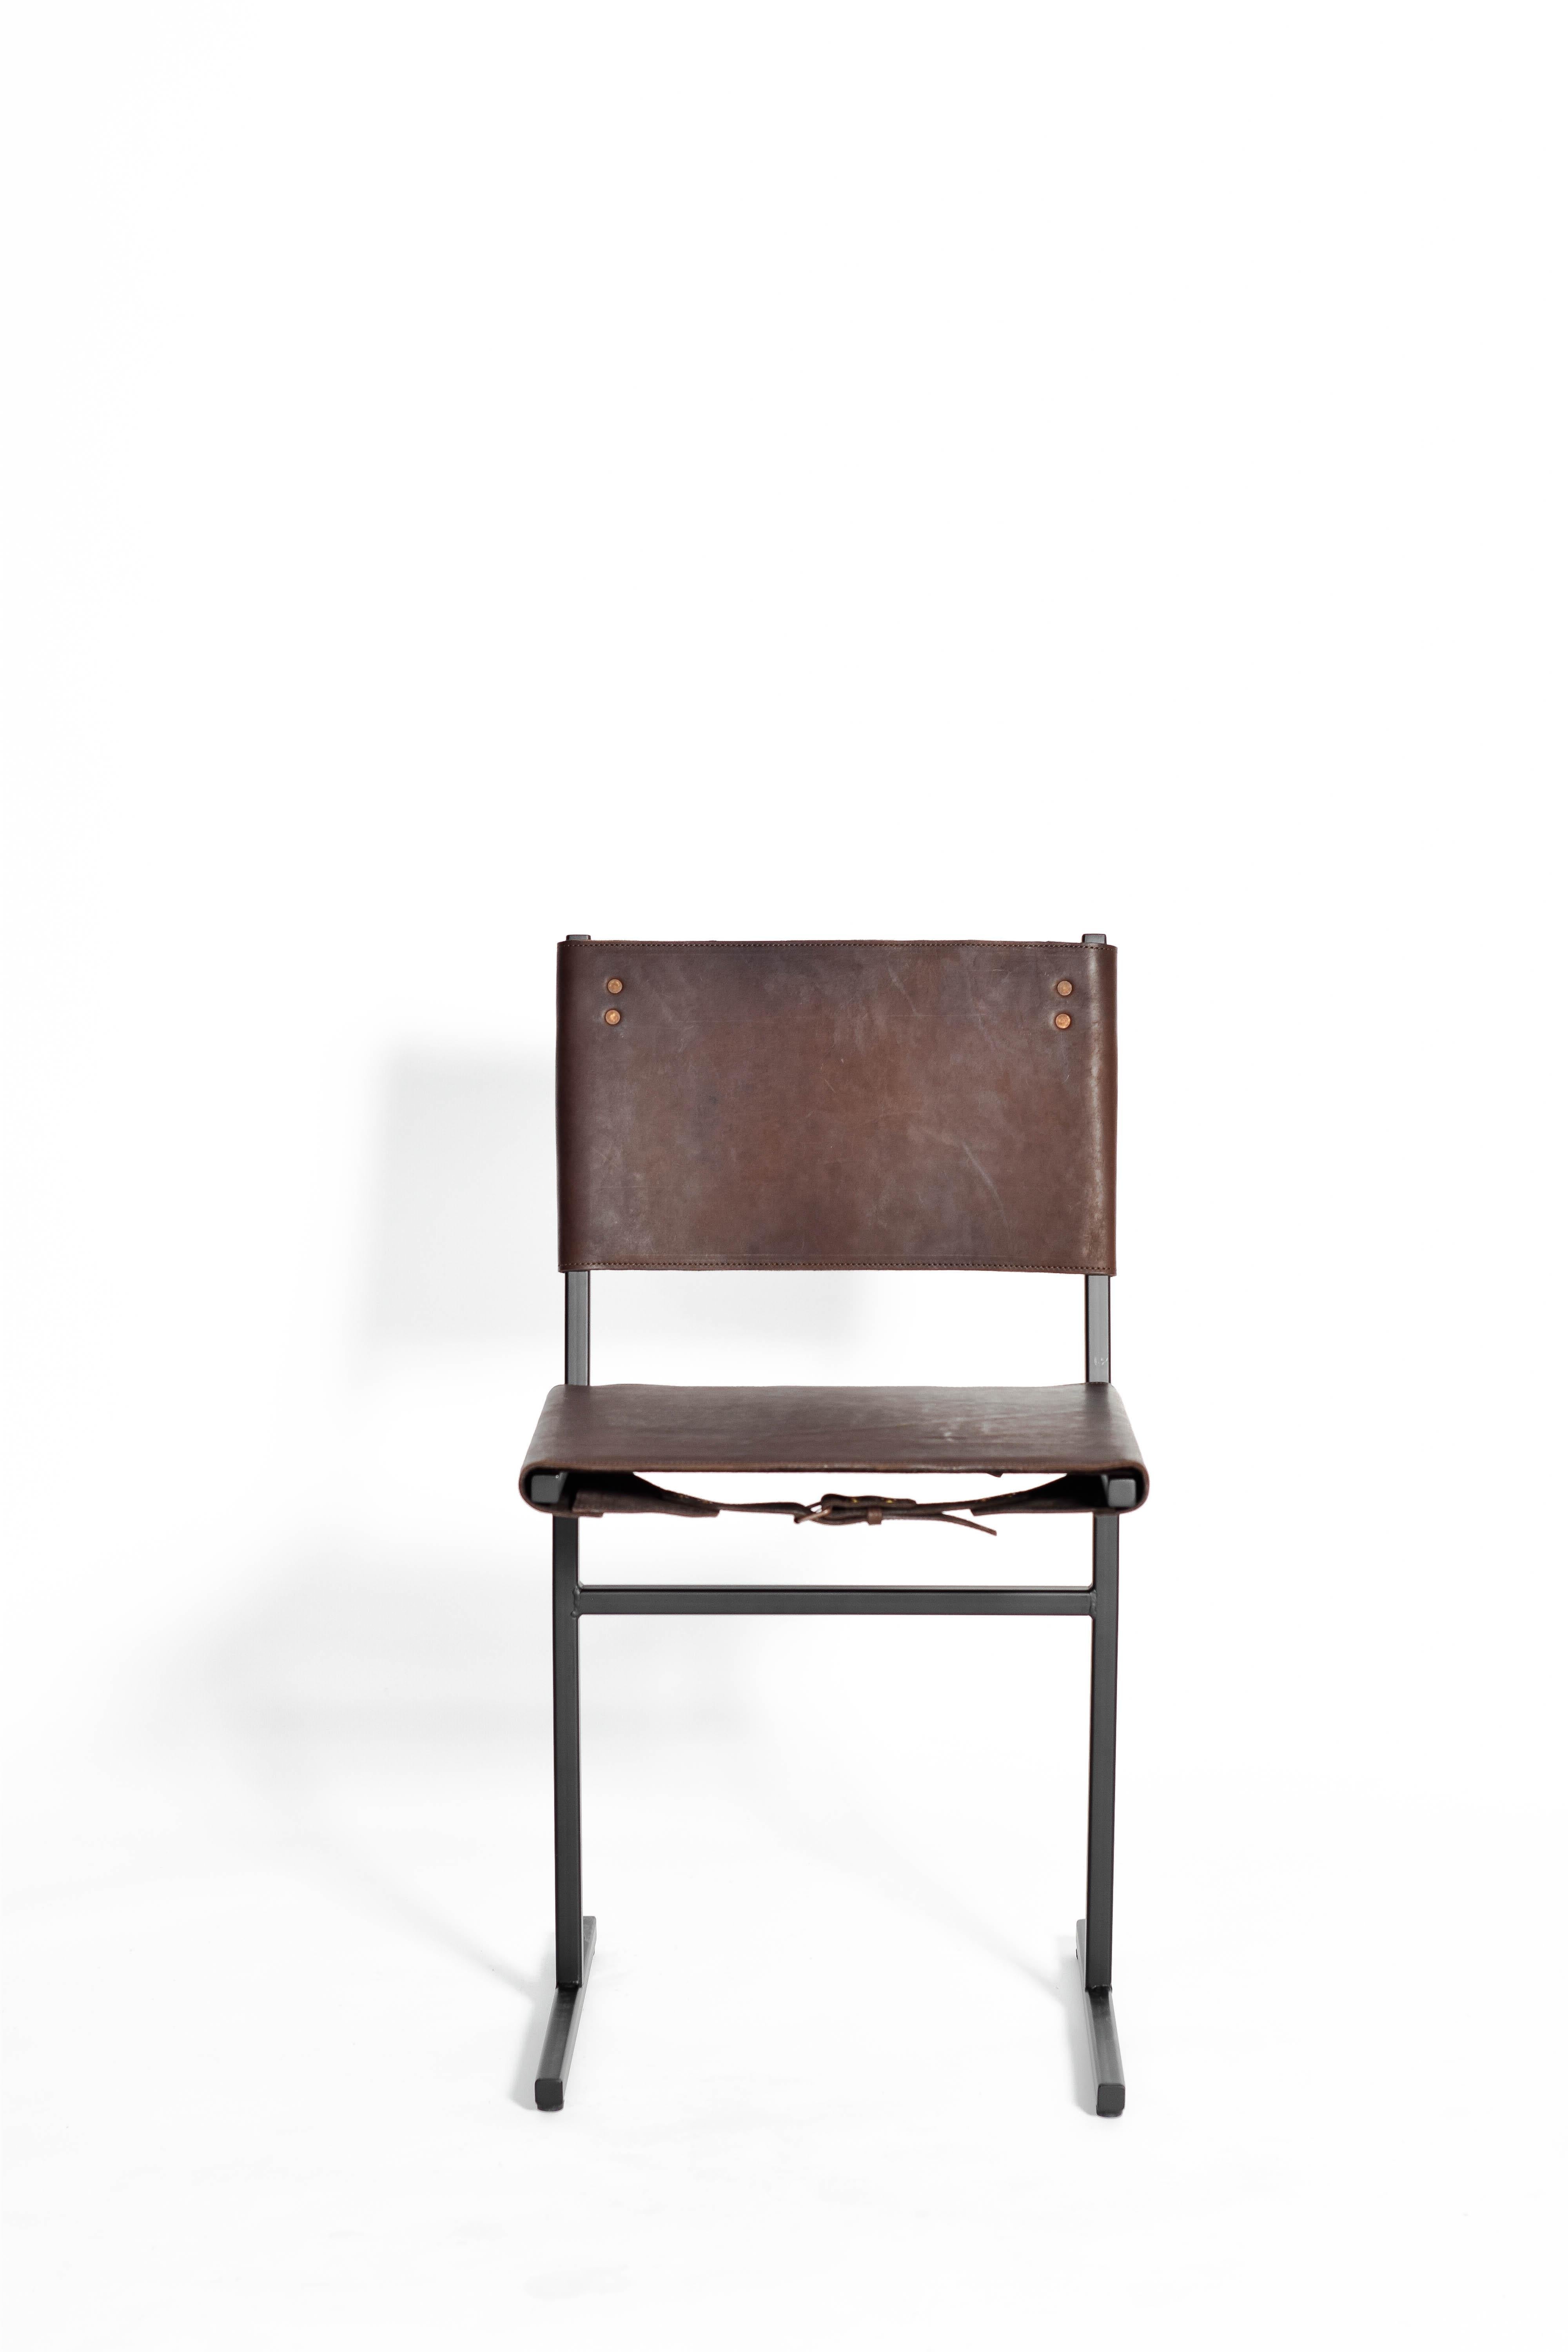 Chocolate and black Memento chair, Jesse Sanderson
Original signed chair by Jesse Sanderson
Materials: leather, steel
Dimensions: W 43 x D 50 x H 80 cm 
 Seating height: 47 cm.

 

Five lines and a circle – the human body can be as simple as the